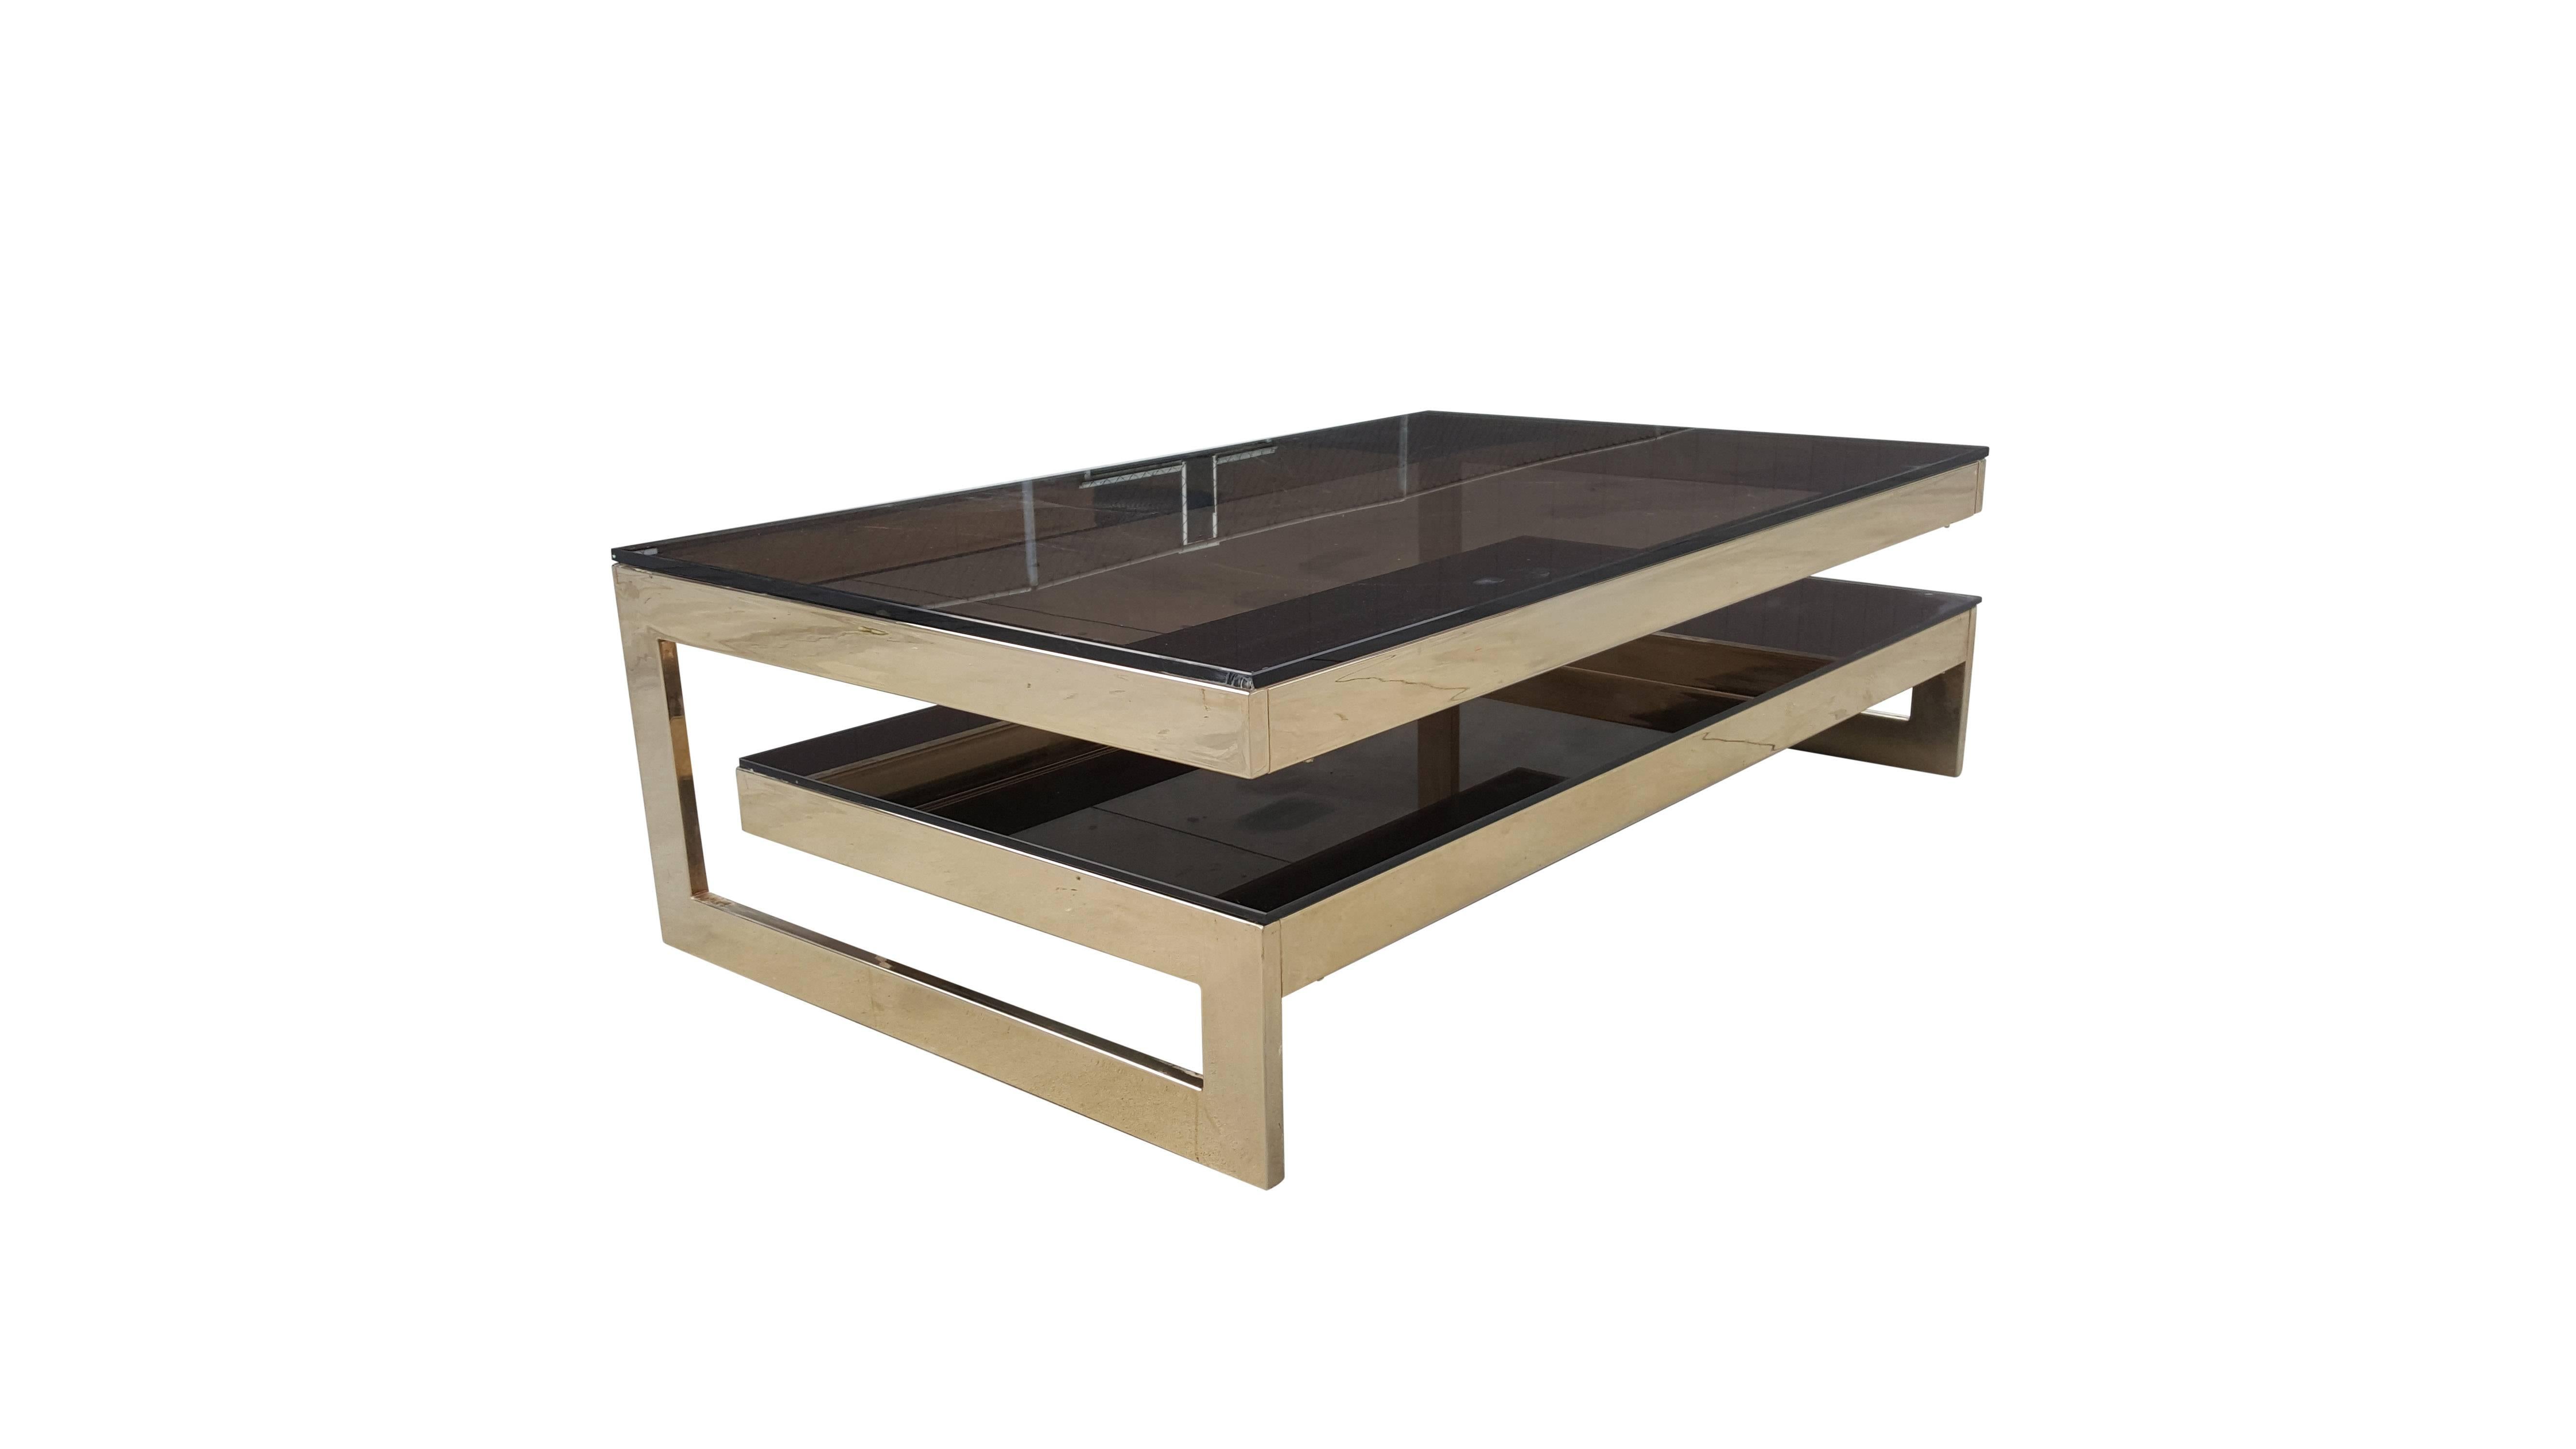 G-Shaped, Gold-Plated Coffee Table by Belgo Chrome (Belgisch) im Angebot